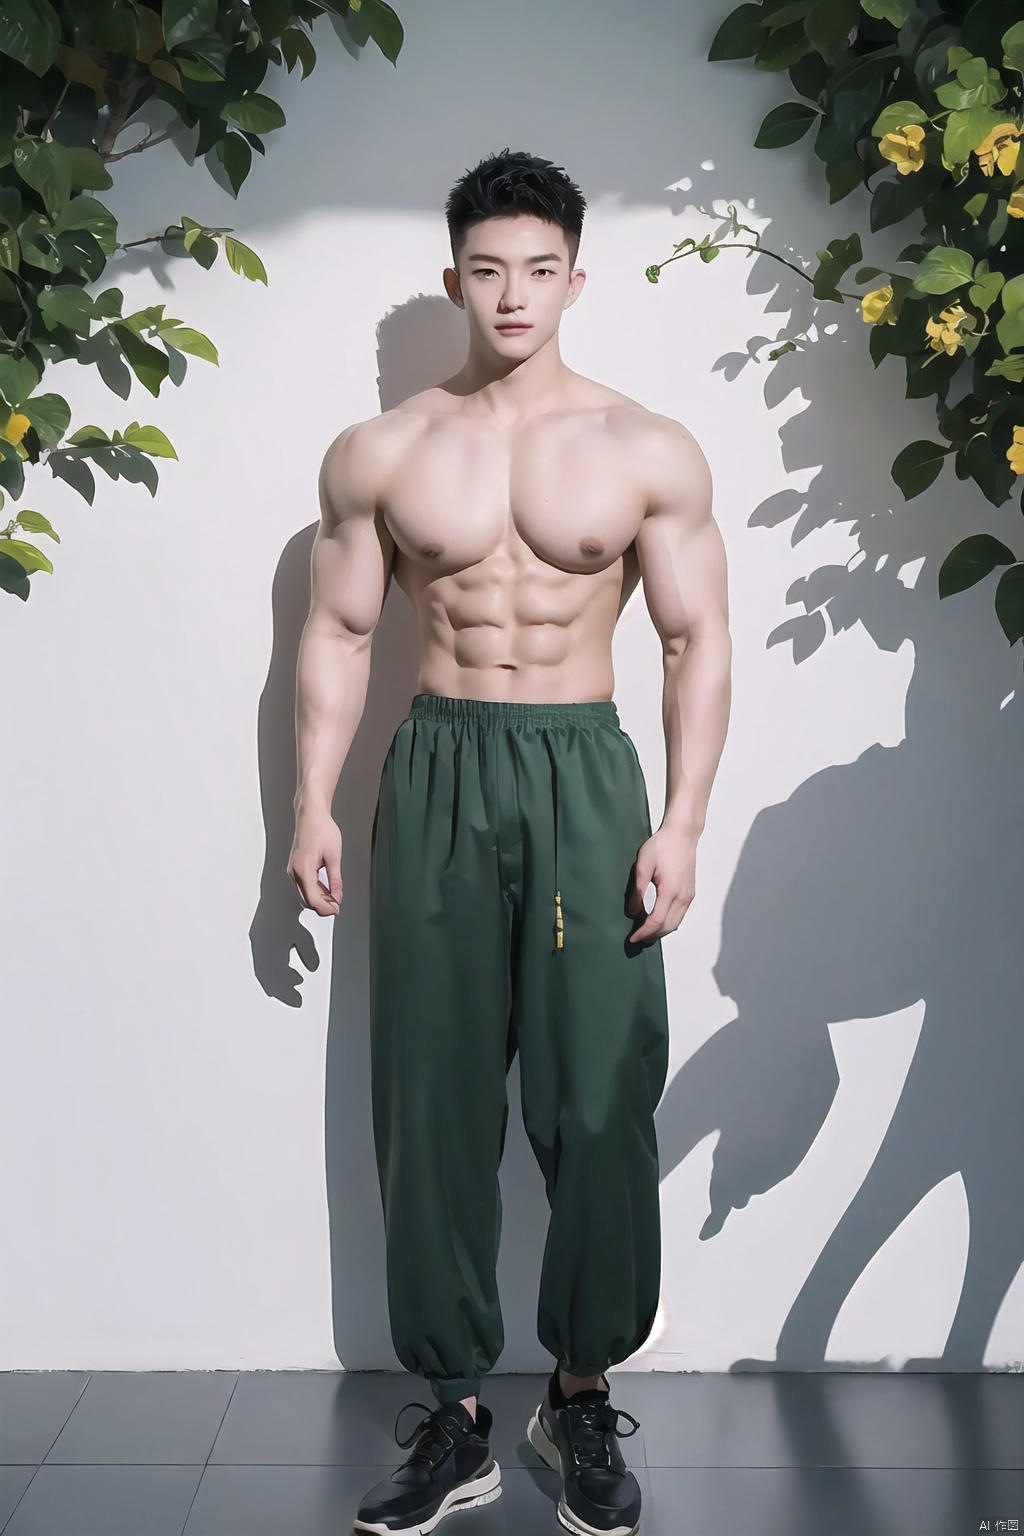  Real Film Photos, close_up Shooting, Professional Photography, Skin, Tattoos, 1 Chinese Boy, ((Full Body Photo))), Handsome, 23 Years Old Fit Figure, High Quality, Masterpiece, ((Realistic)), Big Muscles, Sun, Oil Green Plants, Colorful Flowers Around, Light and Shadow Effects, Lots of Details, Spring Theme